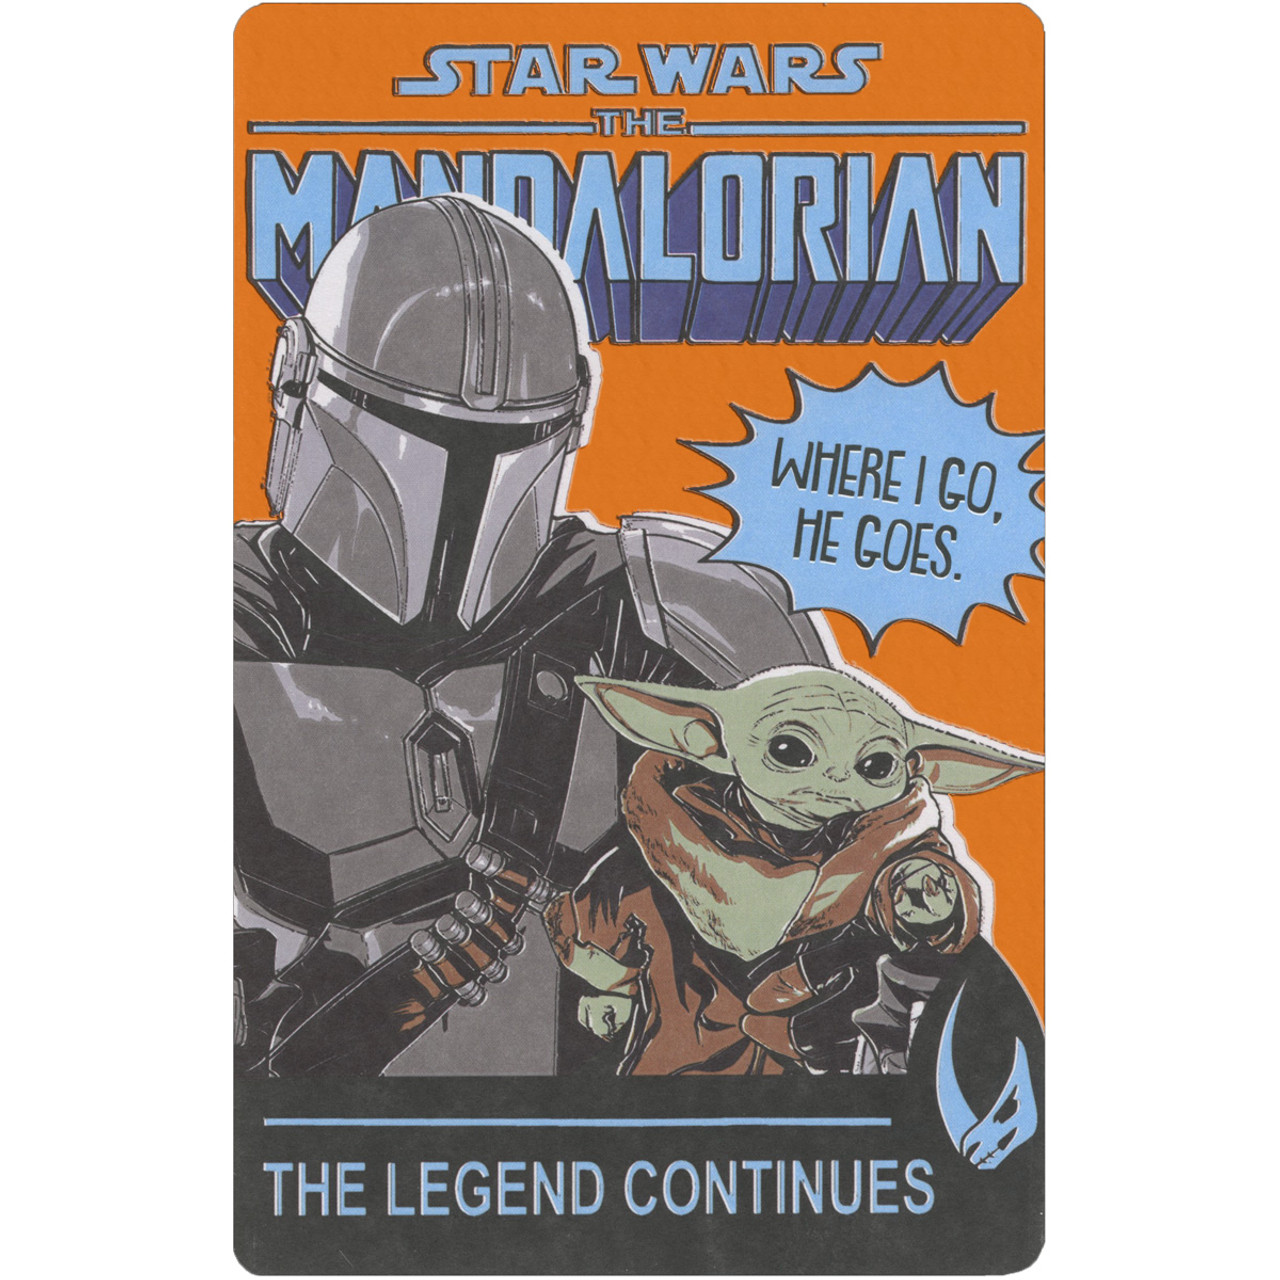 Star Wars: The Mandalorian and Baby Yoda / Grogu on Orange Foil Background  Father\'s Day Card for Dad